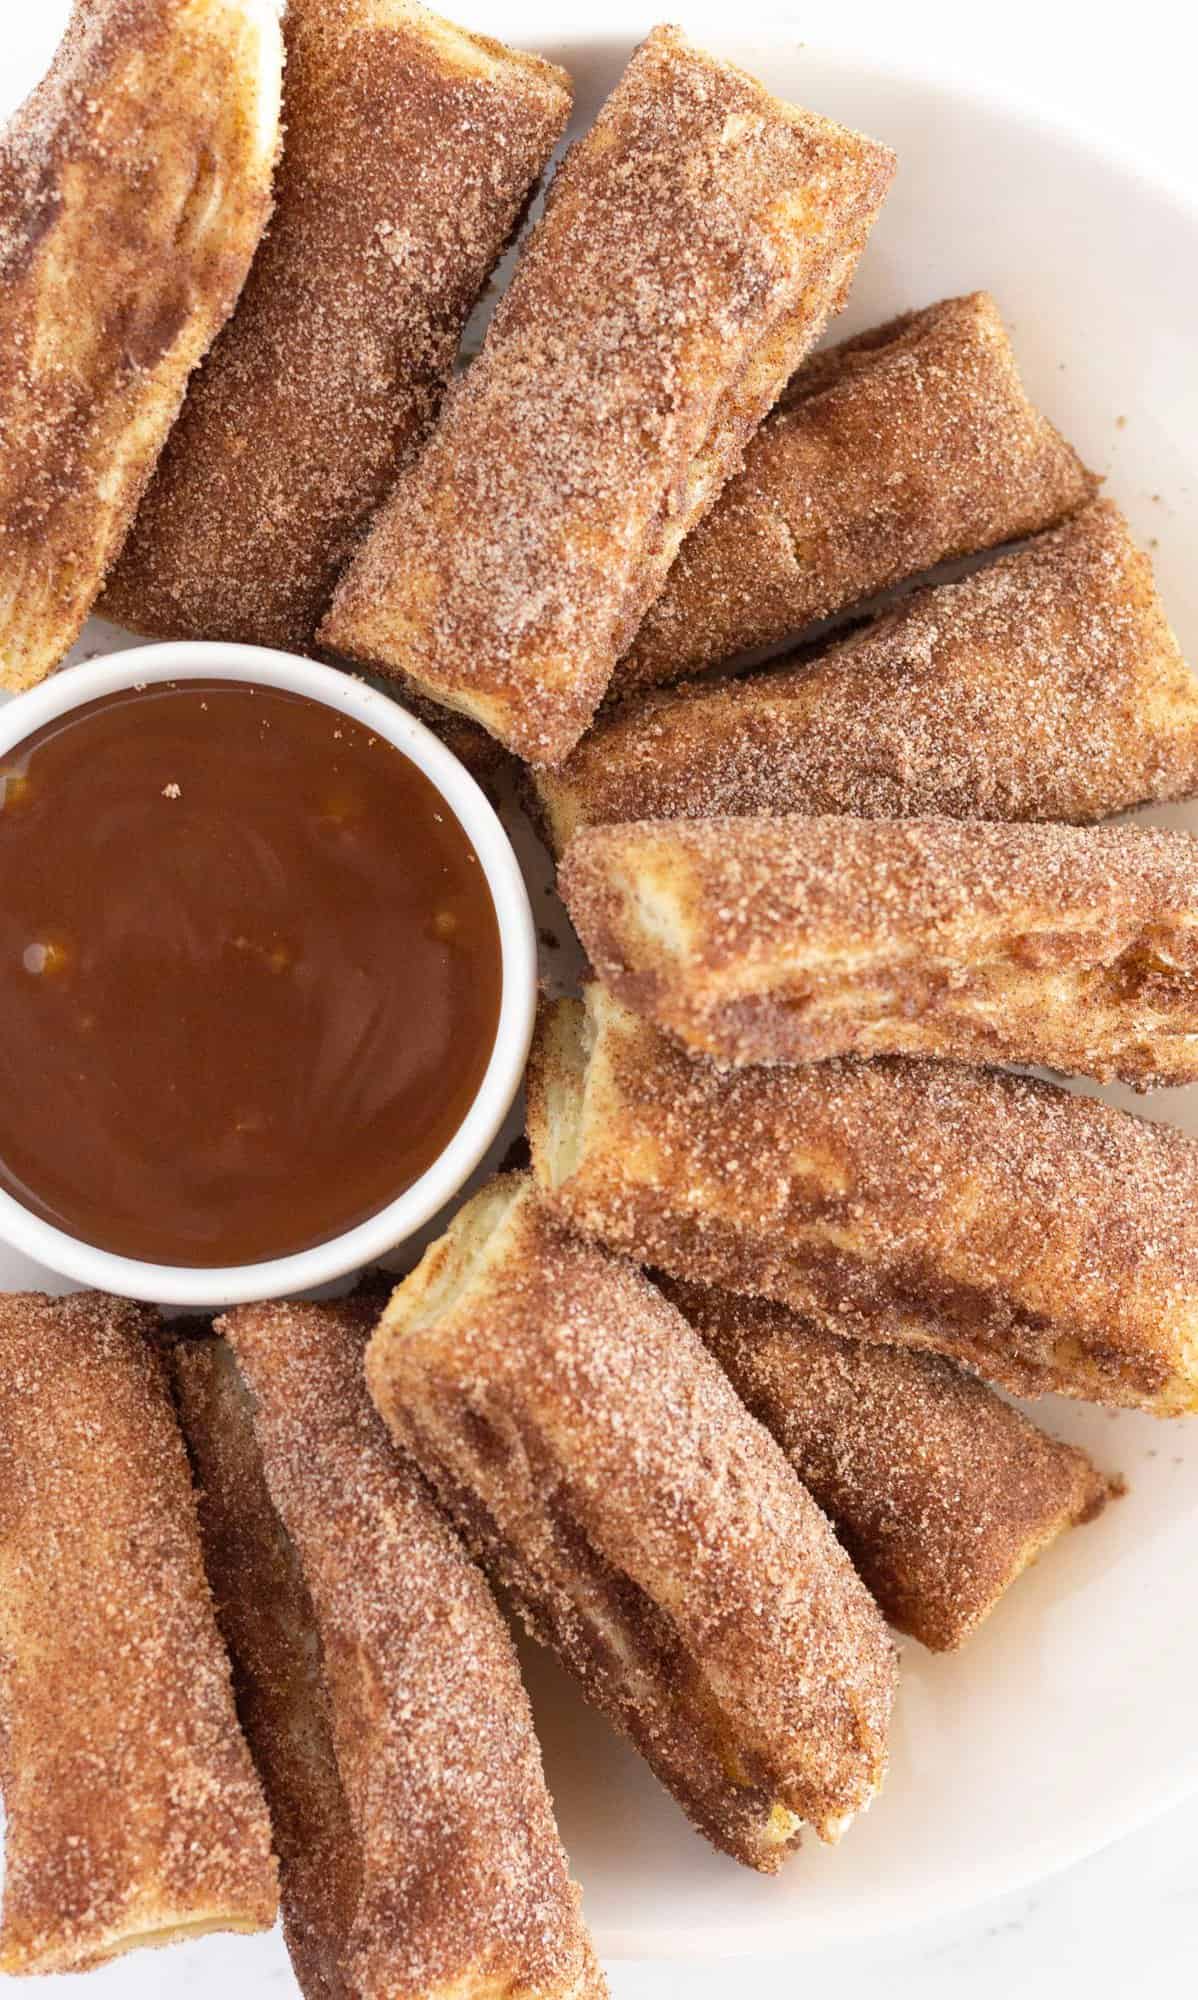 A plate of baked churros, served with salted caramel.